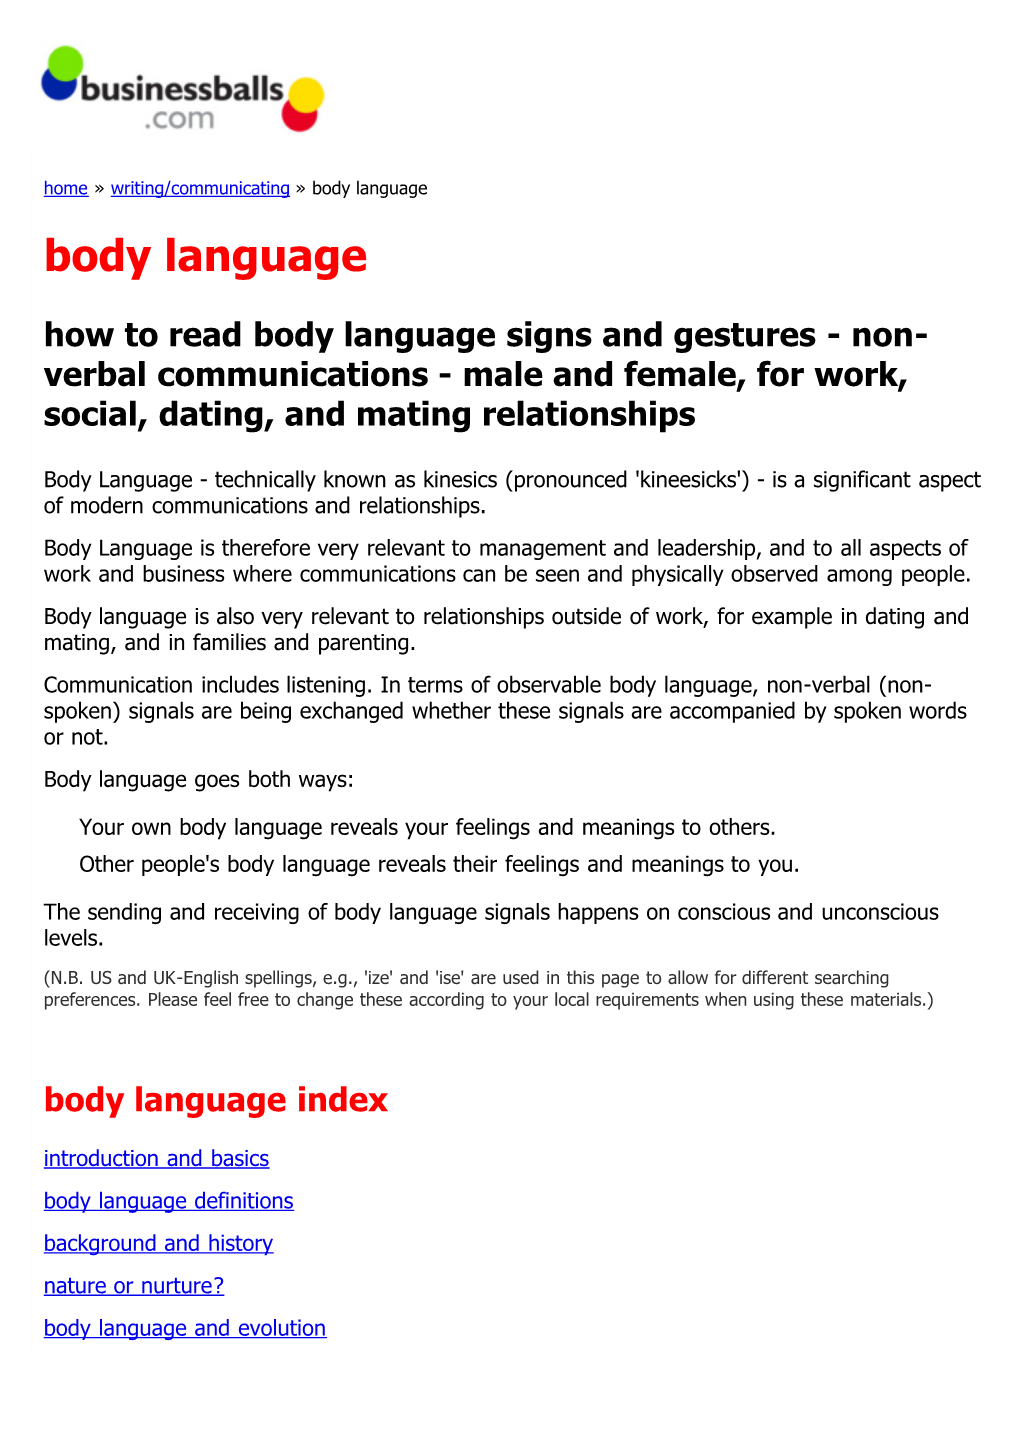 How to Read Body Language Signs and Gestures - Non- Verbal Communications - Male and Female, for Work, Social, Dating, and Mating Relationships